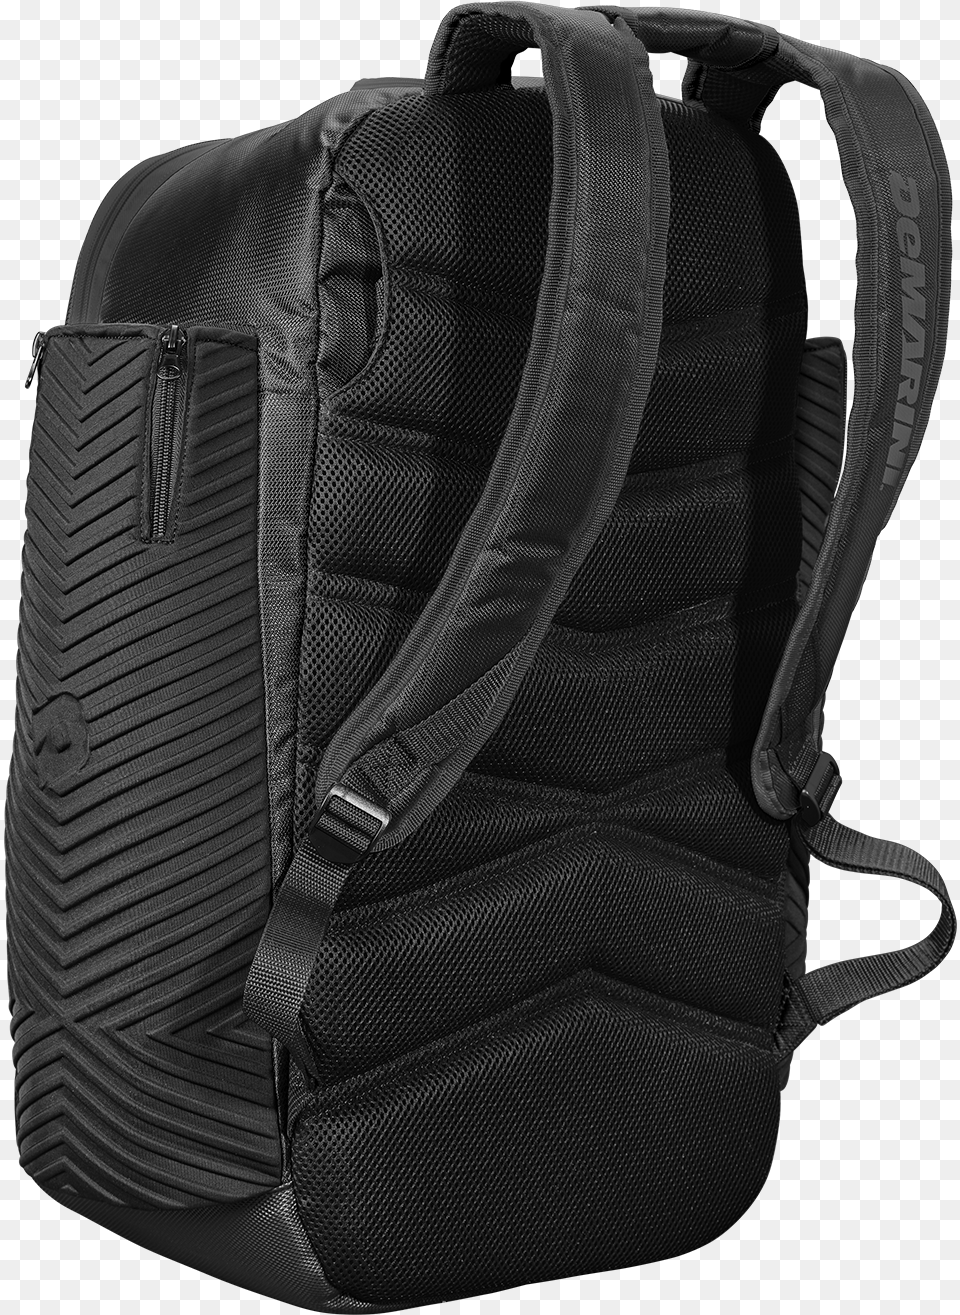 Demarini Special Ops Spectre Backpackclass Lazyload Garment Bag, Backpack Png